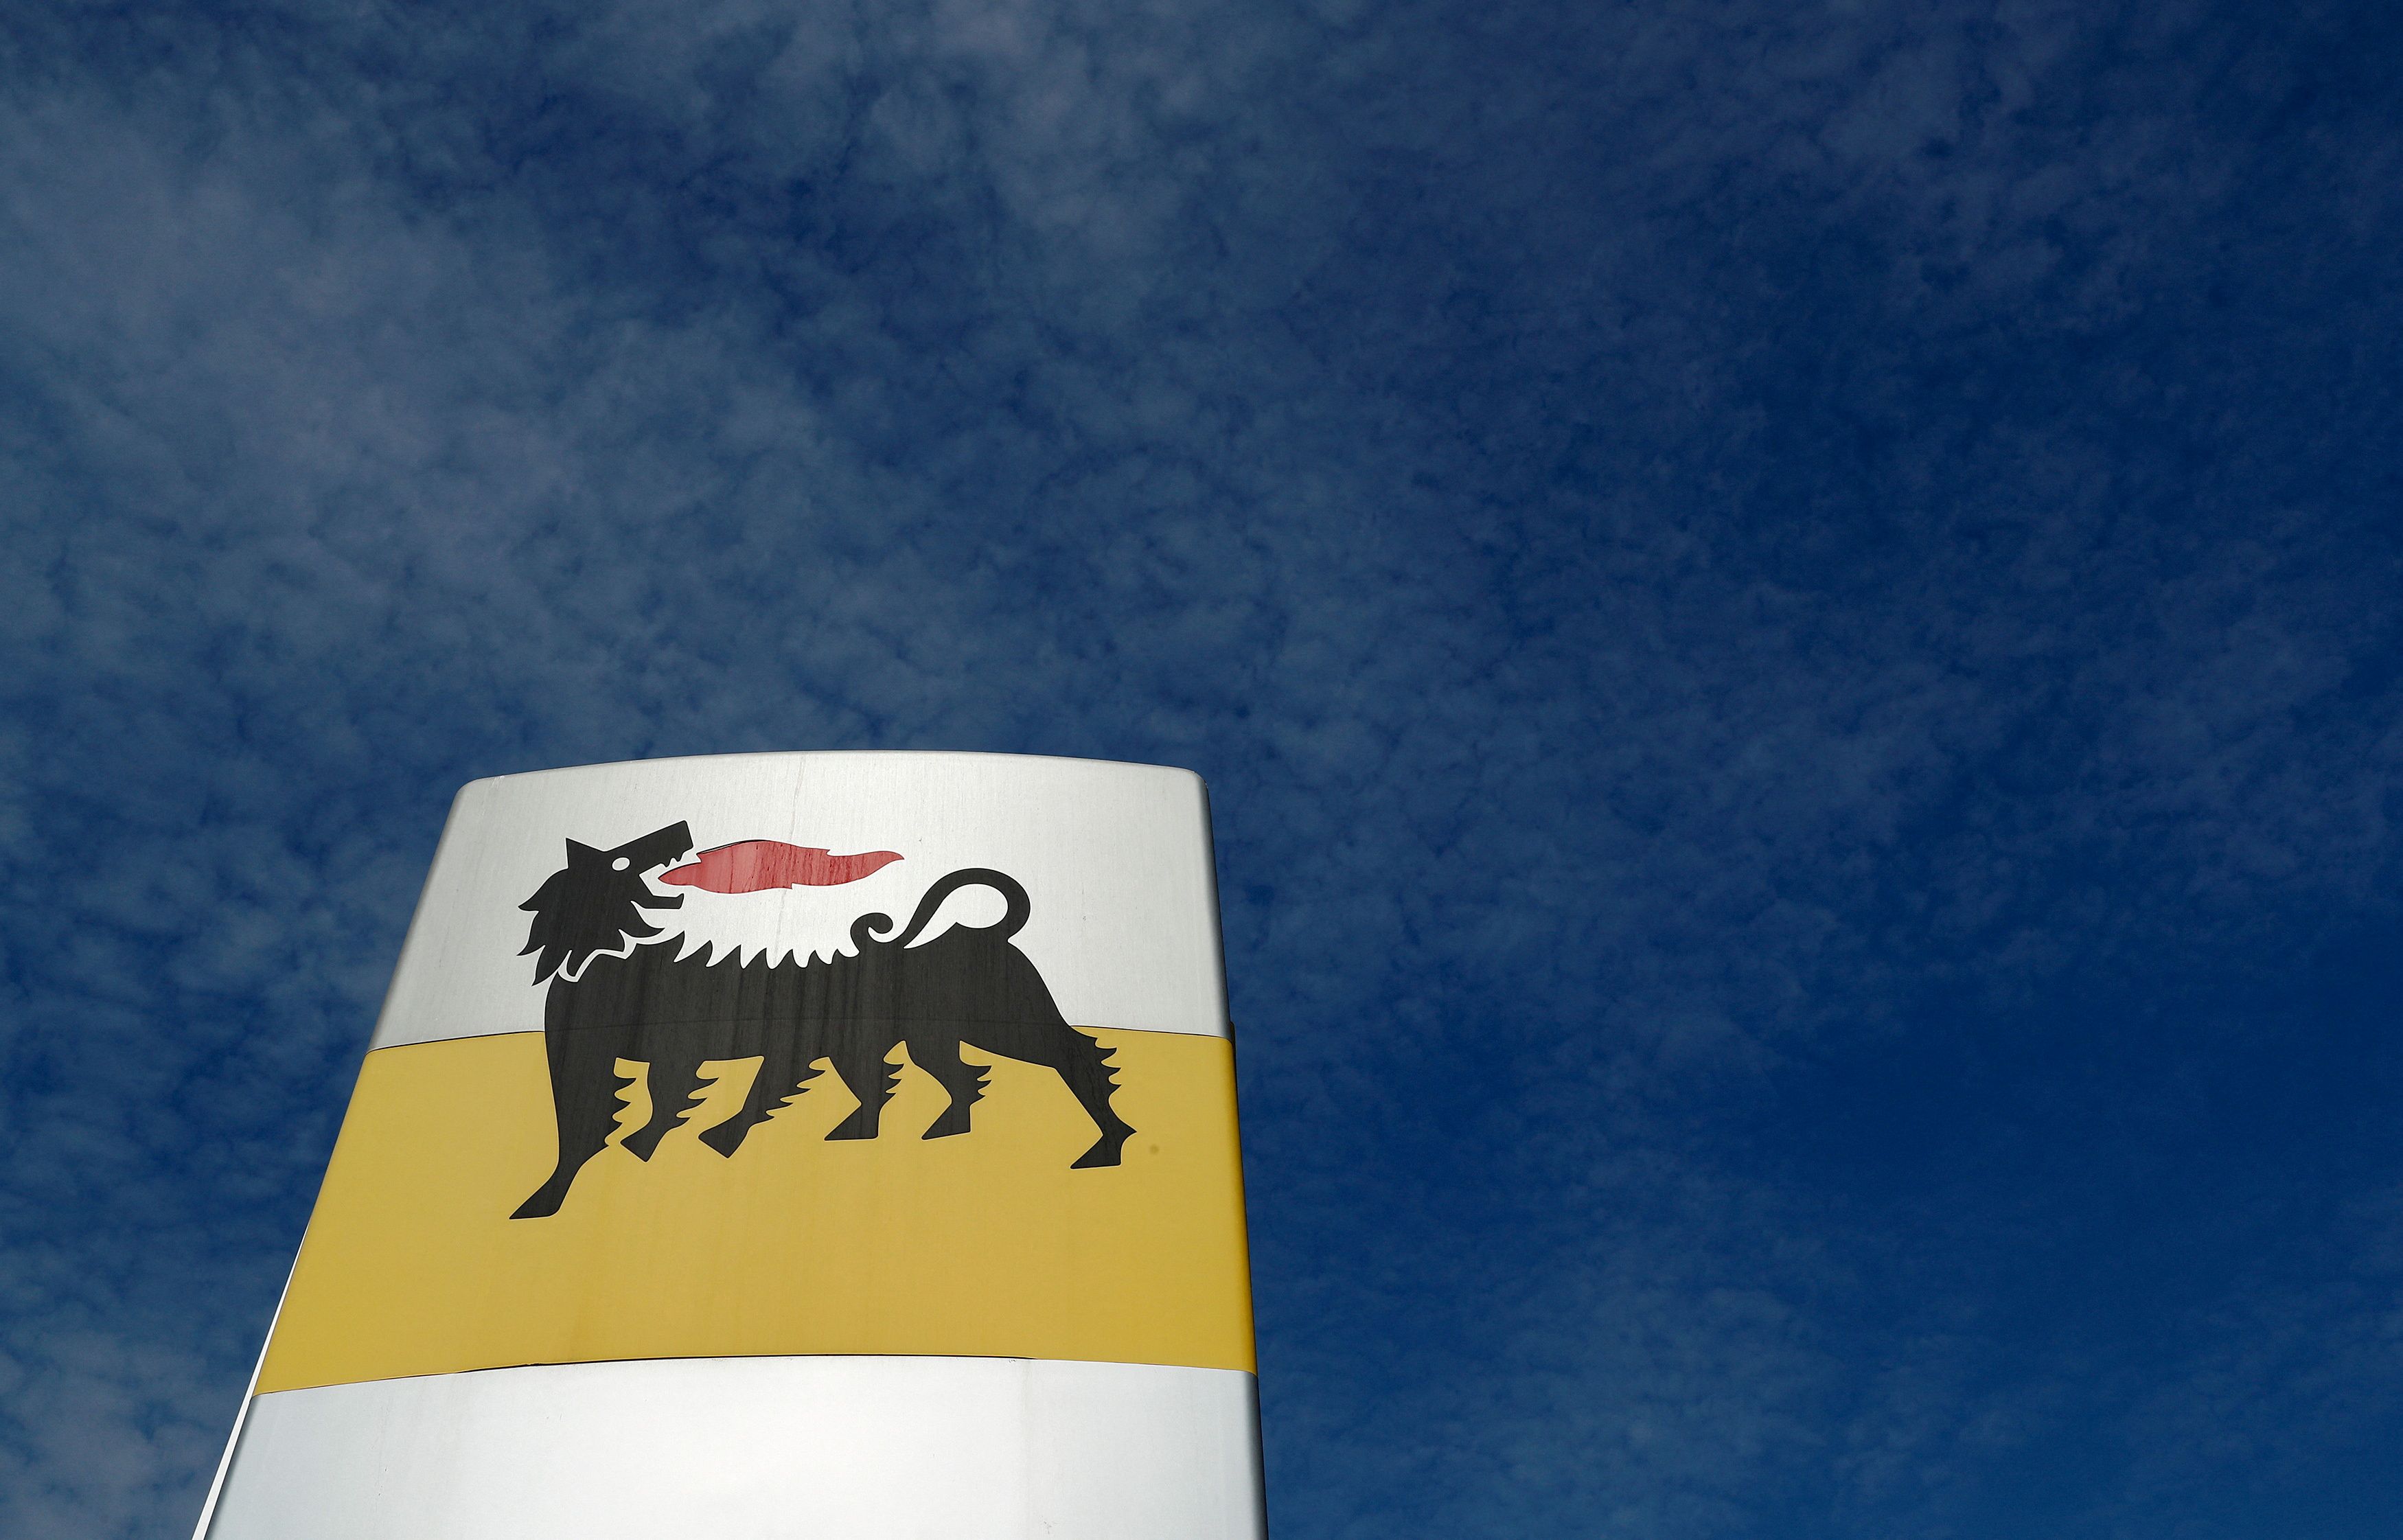 The logo of Italian energy company Eni is seen at a gas station in Rome